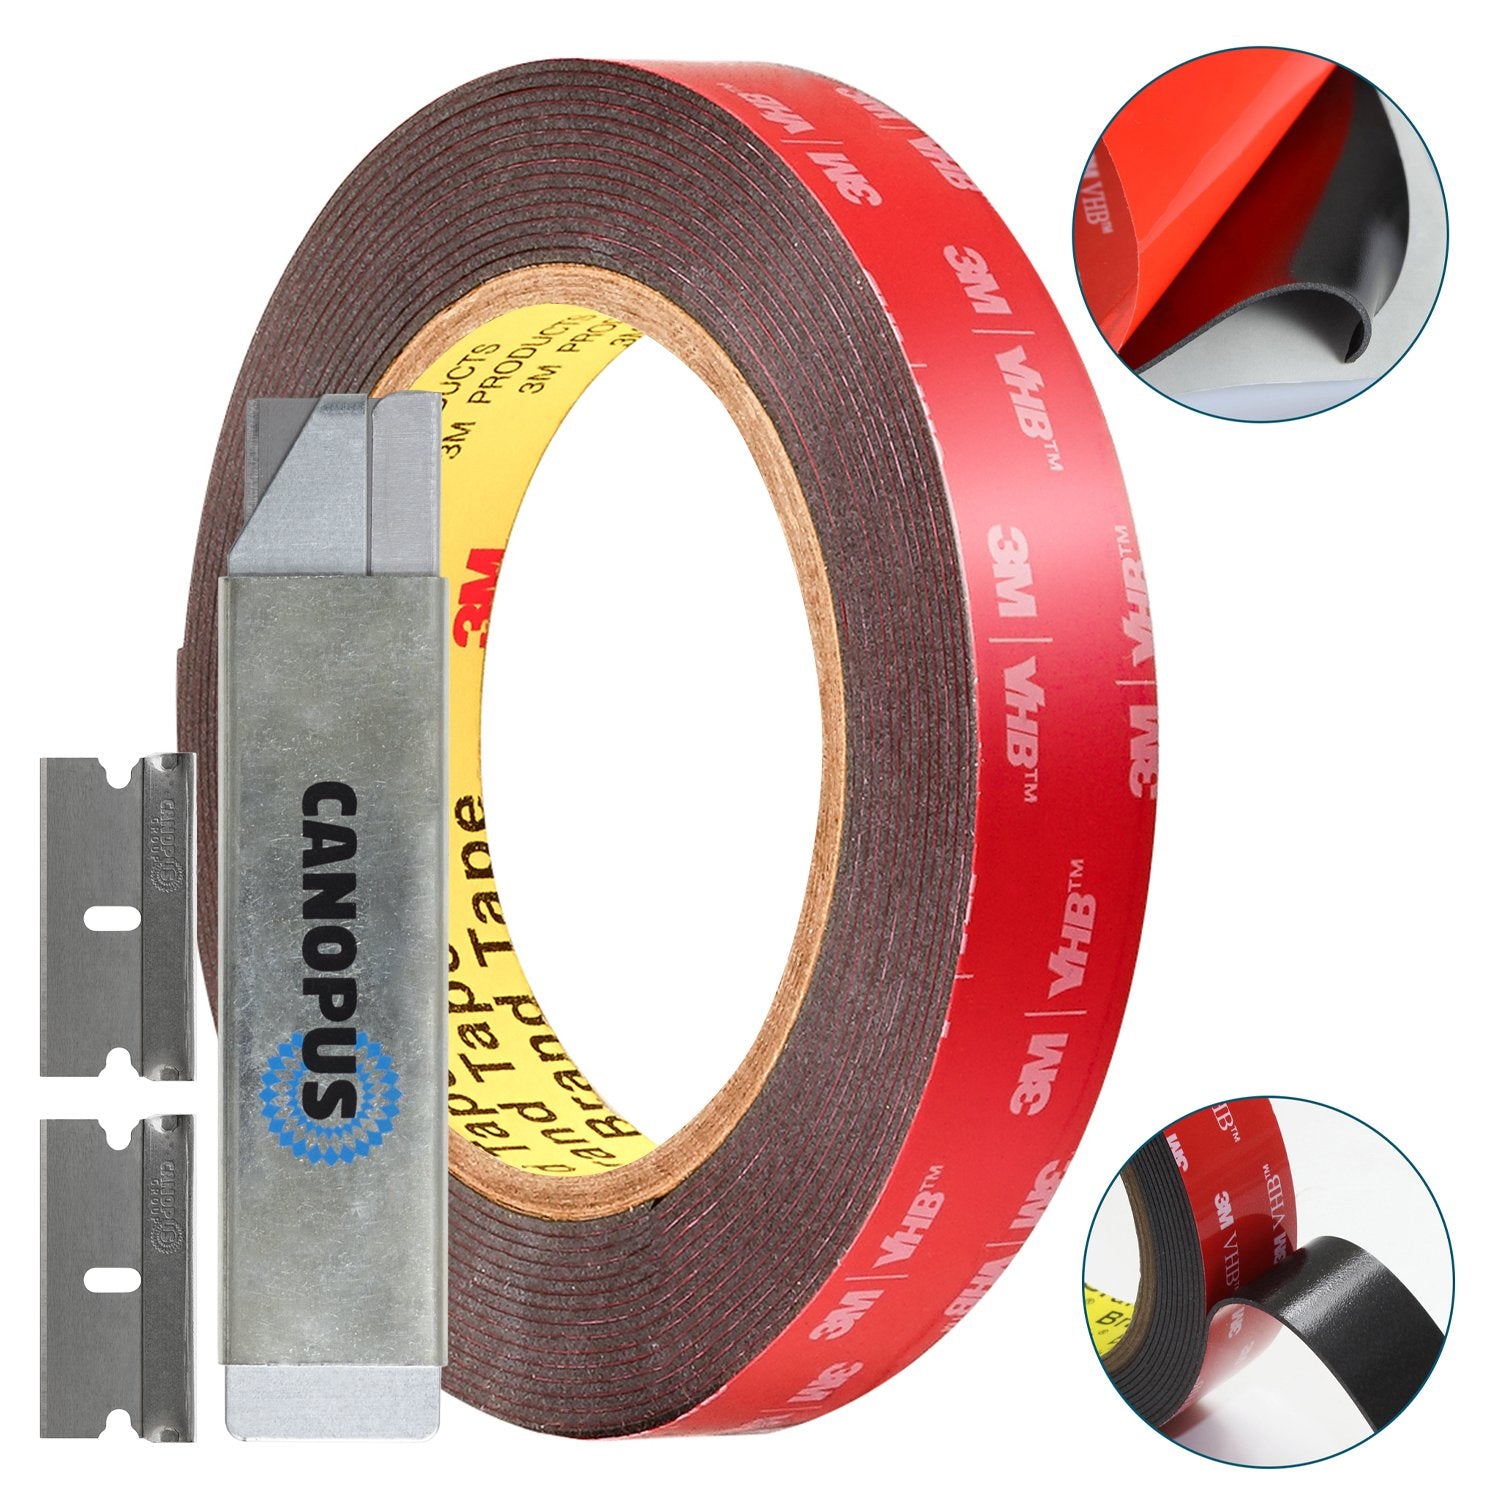 Canopus EZ Pass Mounting Strips: Adhesive Strips, Dual Lock Tape, Ezpass Tag Holder, Peel-and-Stick Strips (6 Sets - 12 Pcs) with Cleaning Prep Pad